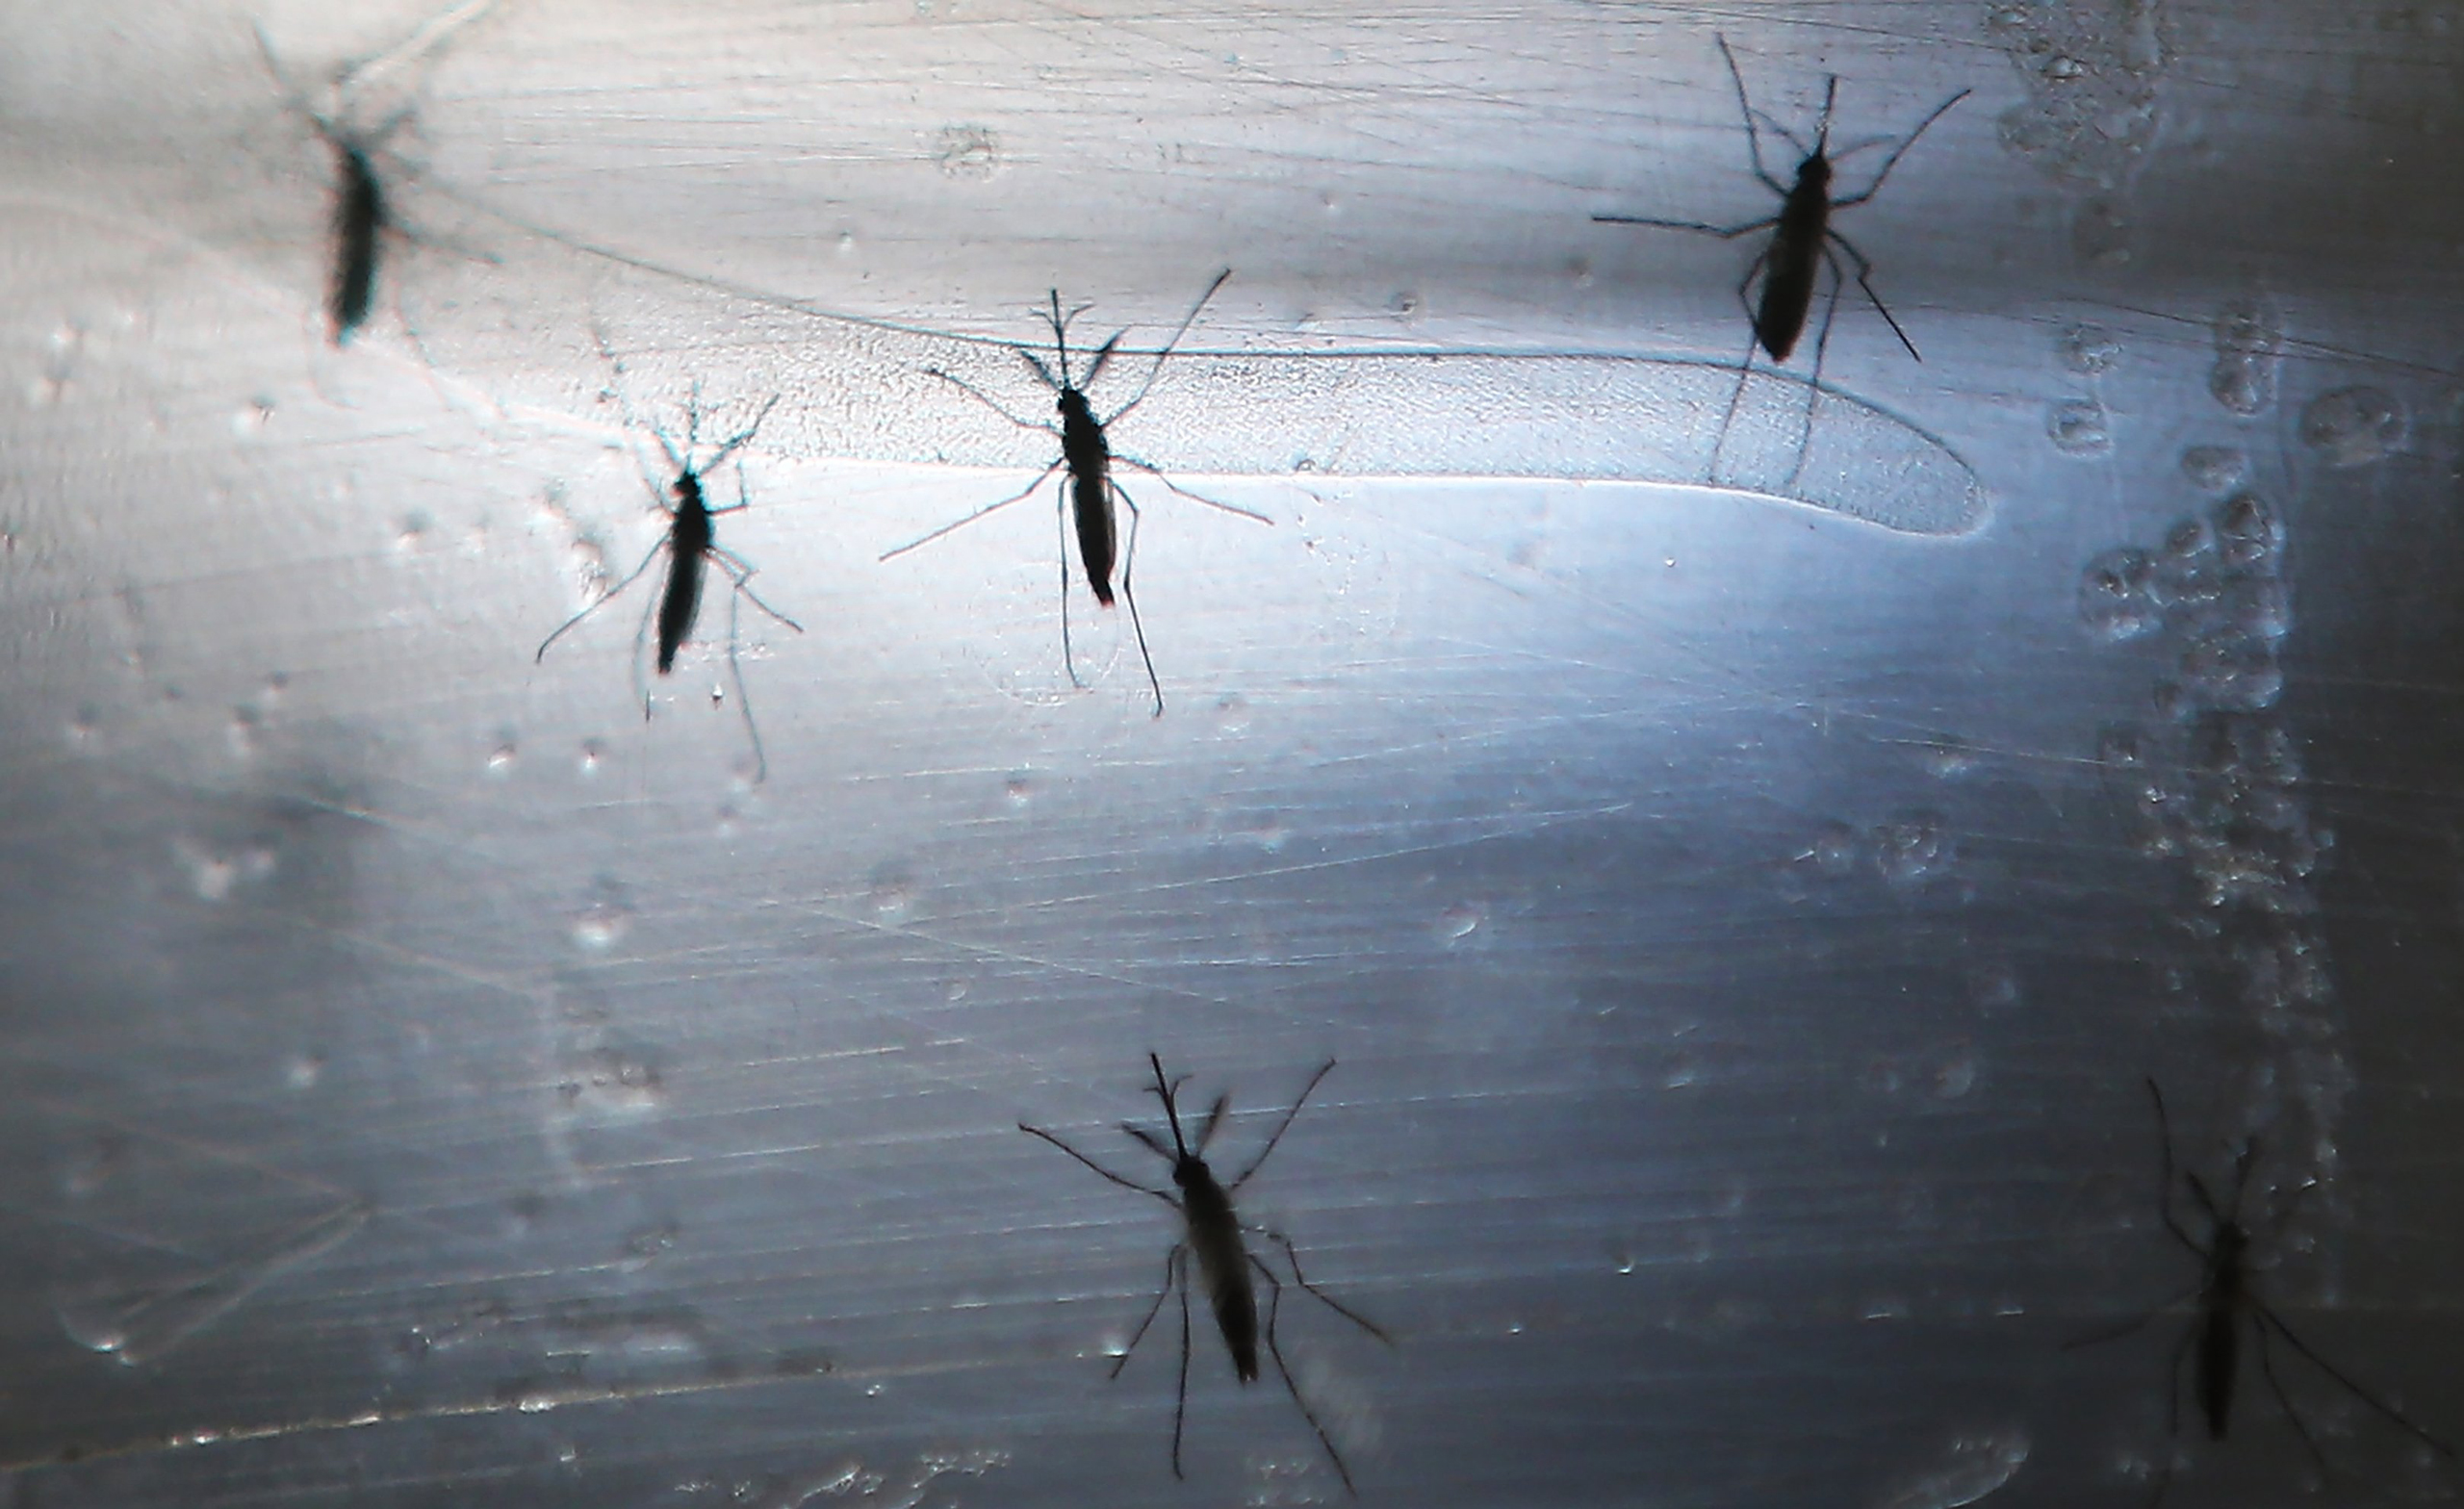 Aedes aegypti mosquitos are seen in a lab at the Fiocruz Institute in Recife, Brazil, on June 2, 2016. (Mario Tama—Getty Images)